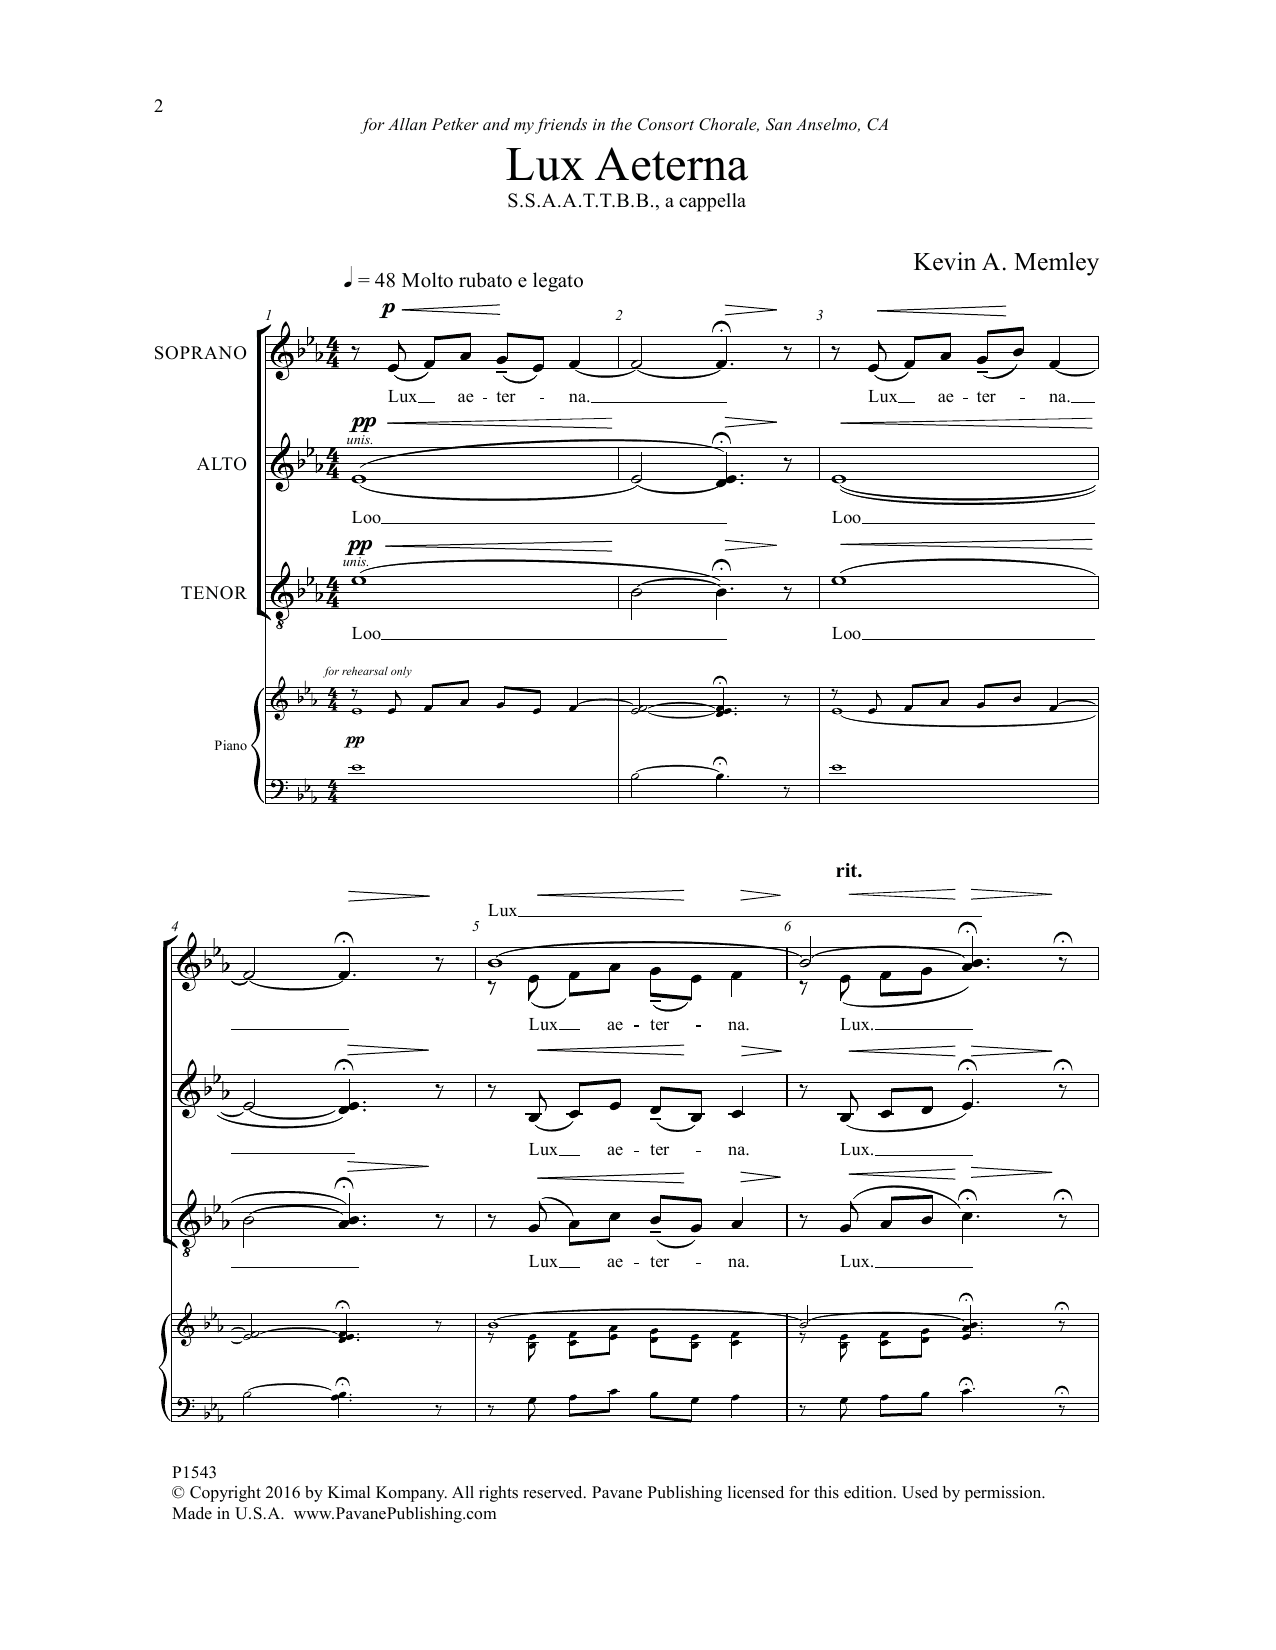 Download Kevin Memley Lux Aeterna Sheet Music